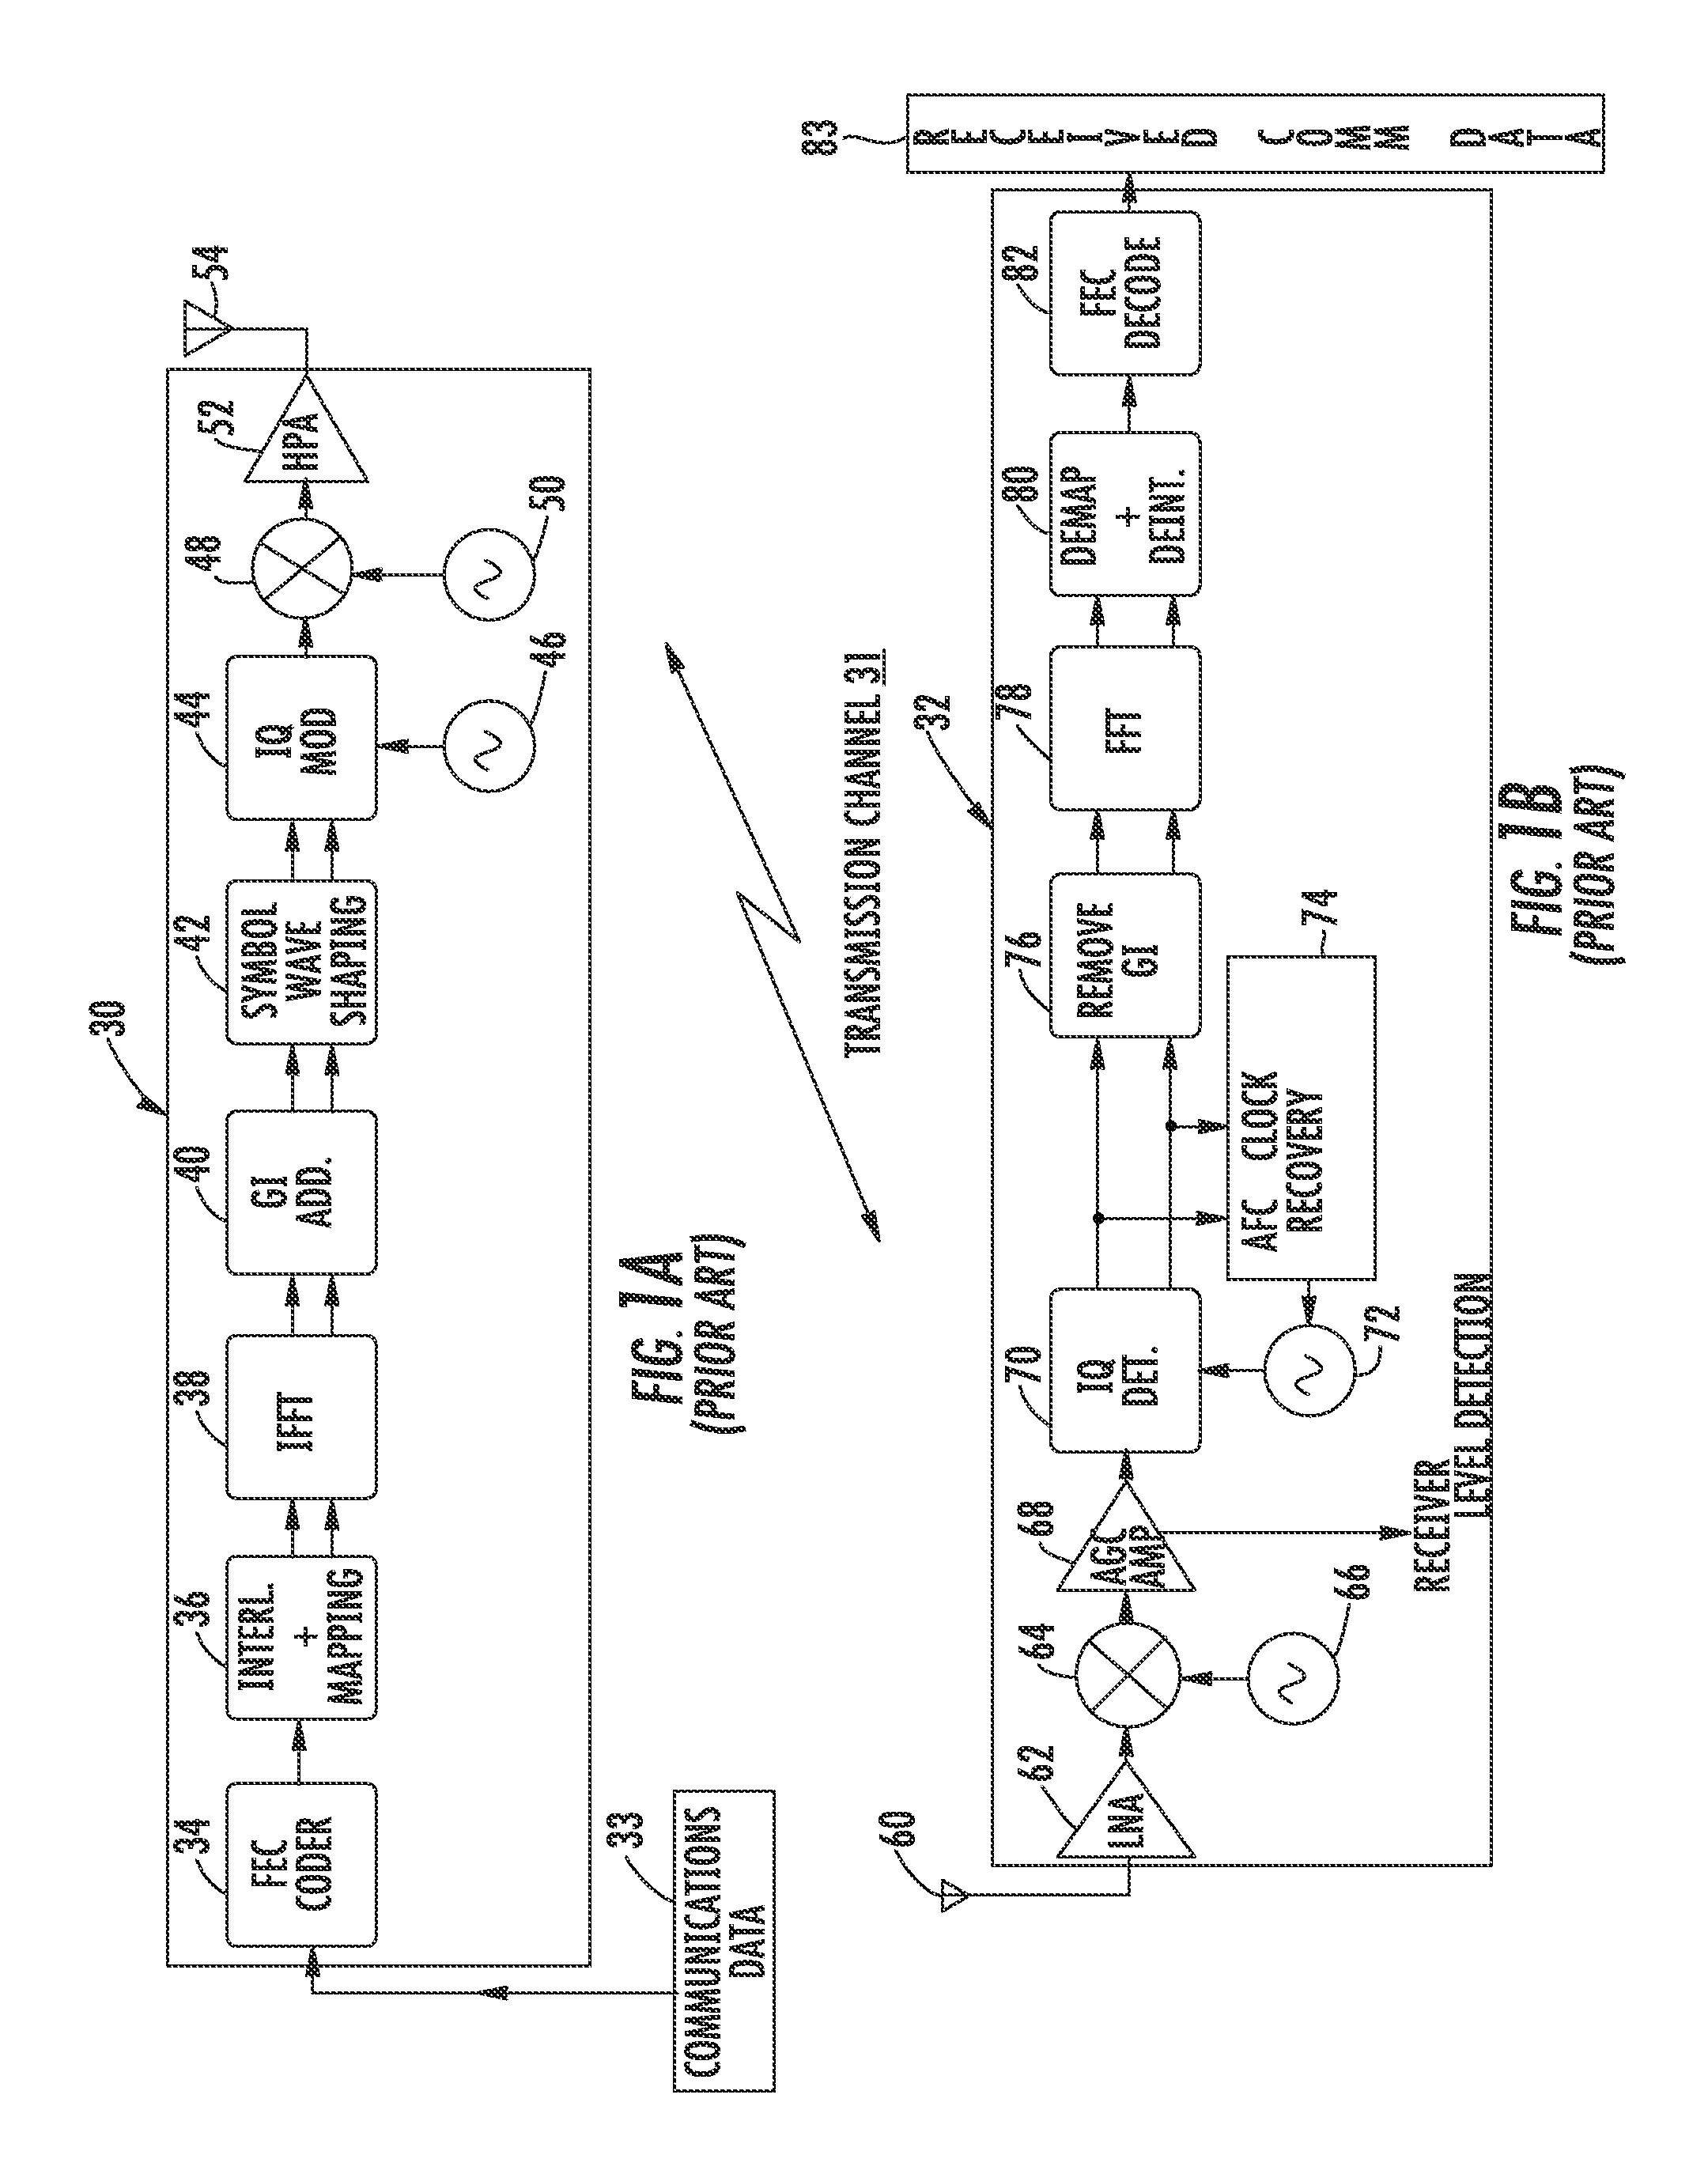 Orthogonal frequency division multiplexing (OFDM) communications device and method that incorporates low papr preamble and receiver channel estimate circuit